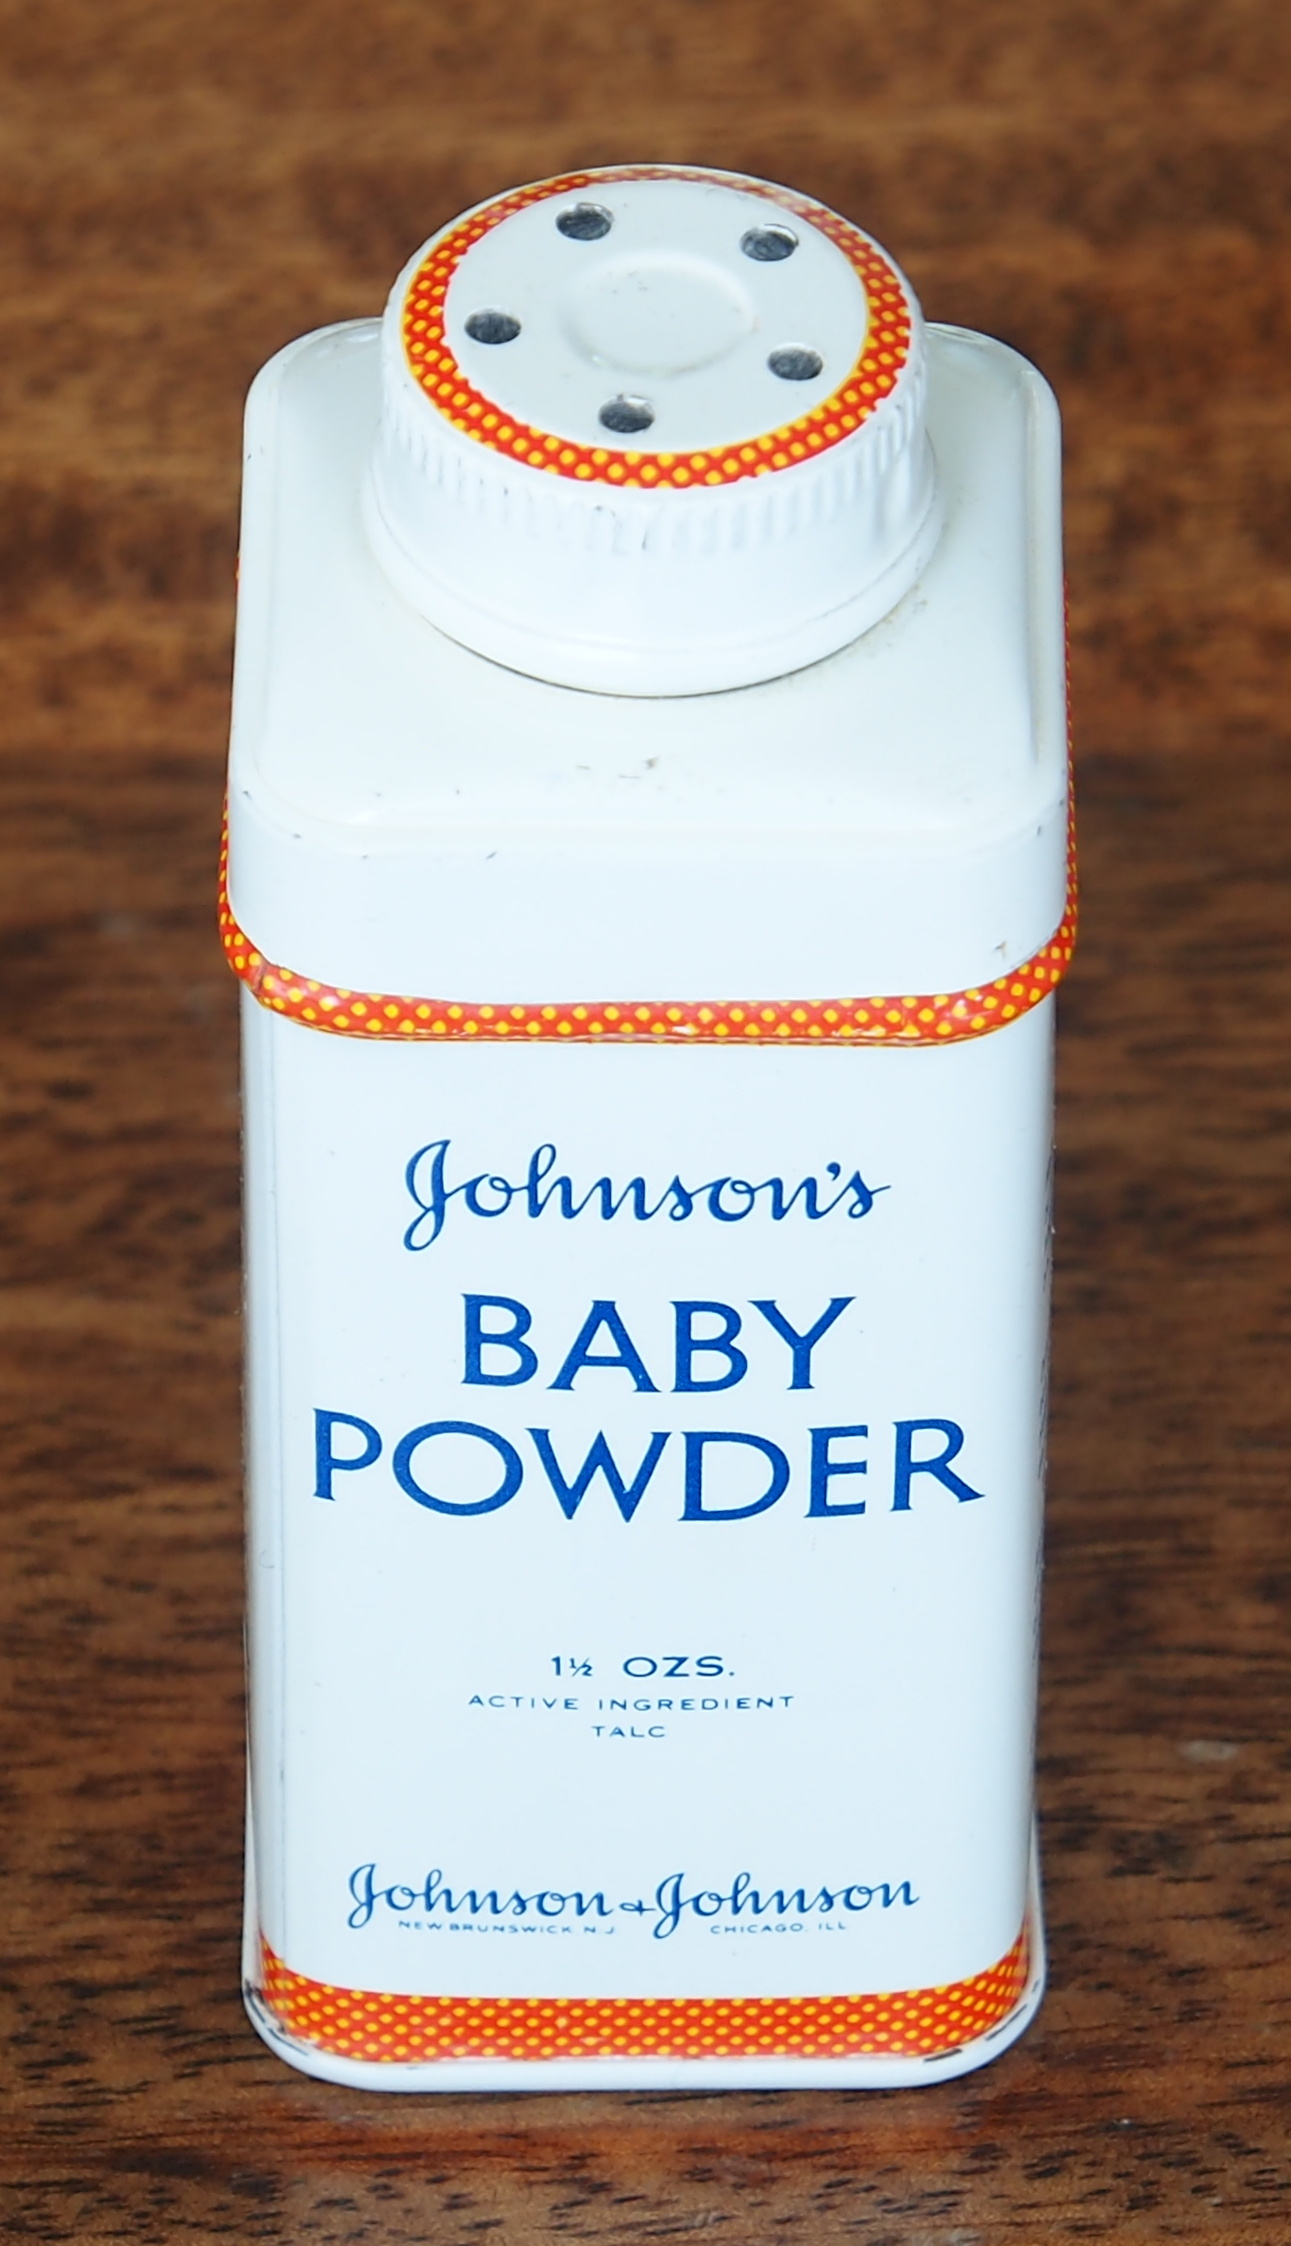 Johnson & Johnson Pays Ordered to Pay Billions in Talc-Based Asbestos Case